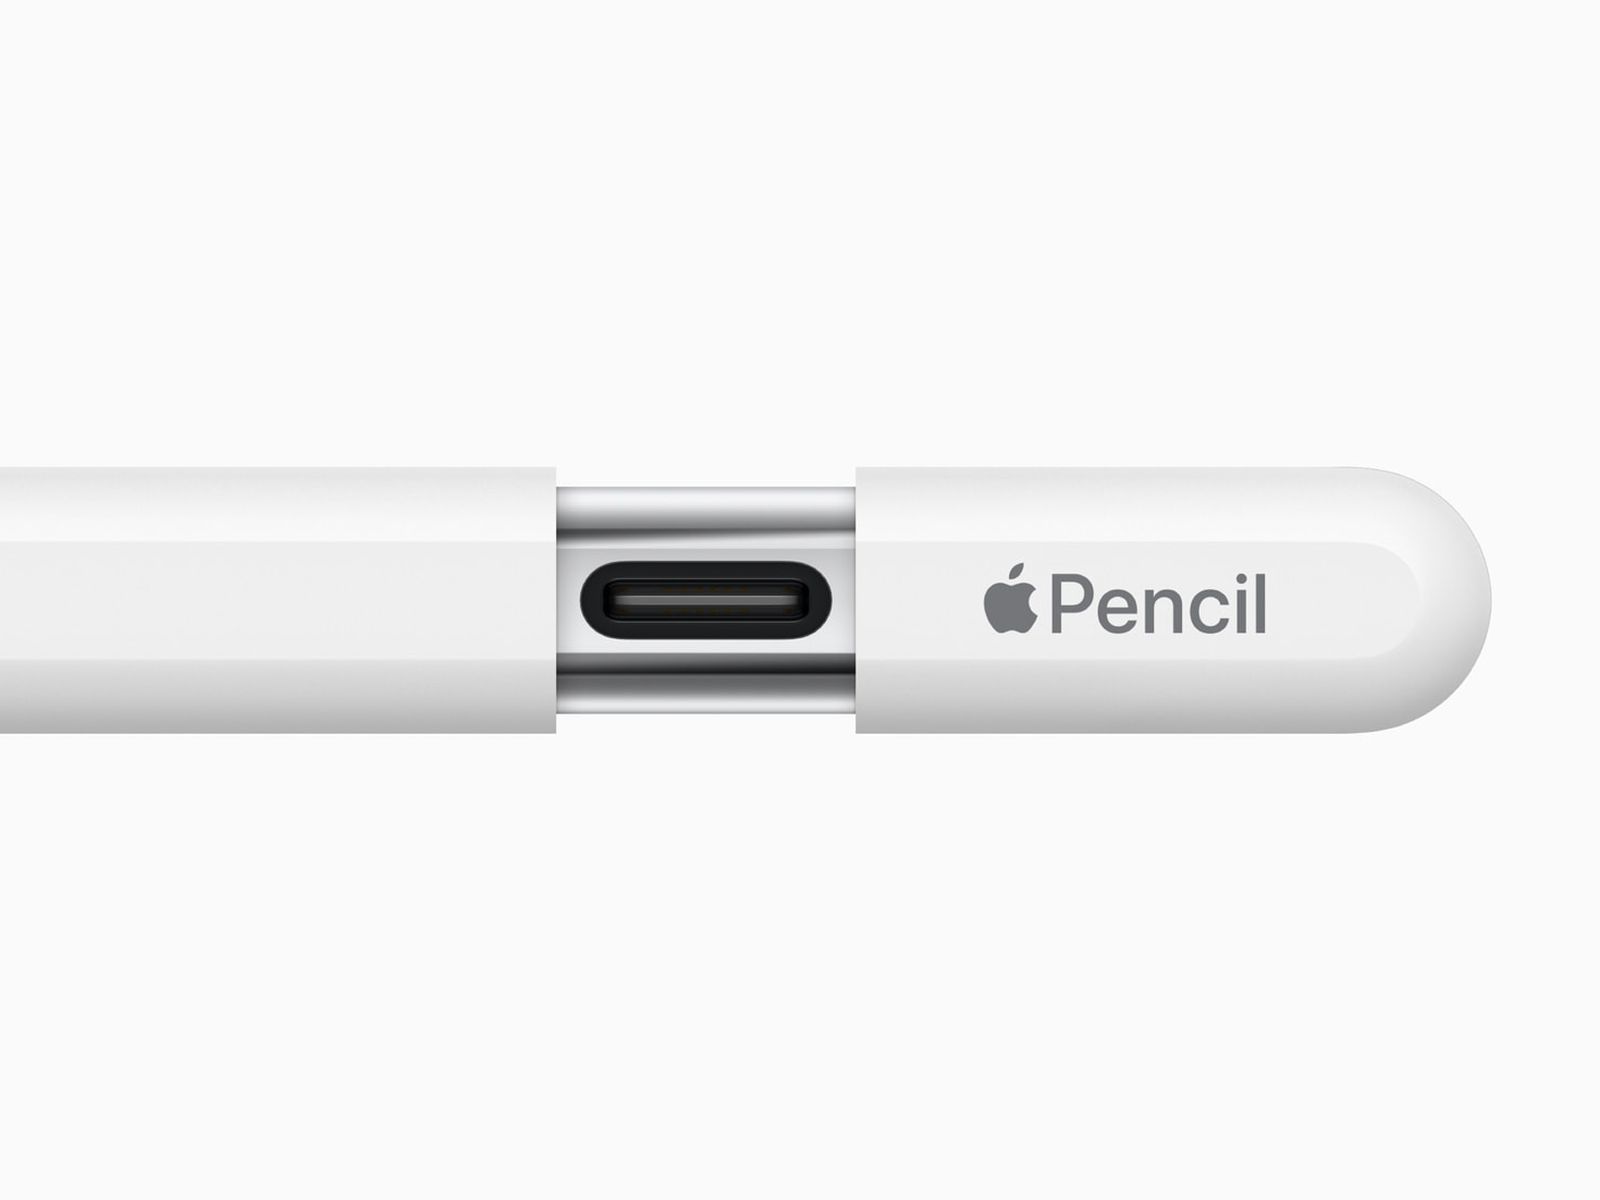 New Apple Pencil Announced With Hidden USB-C Port and More for $79 -  MacRumors